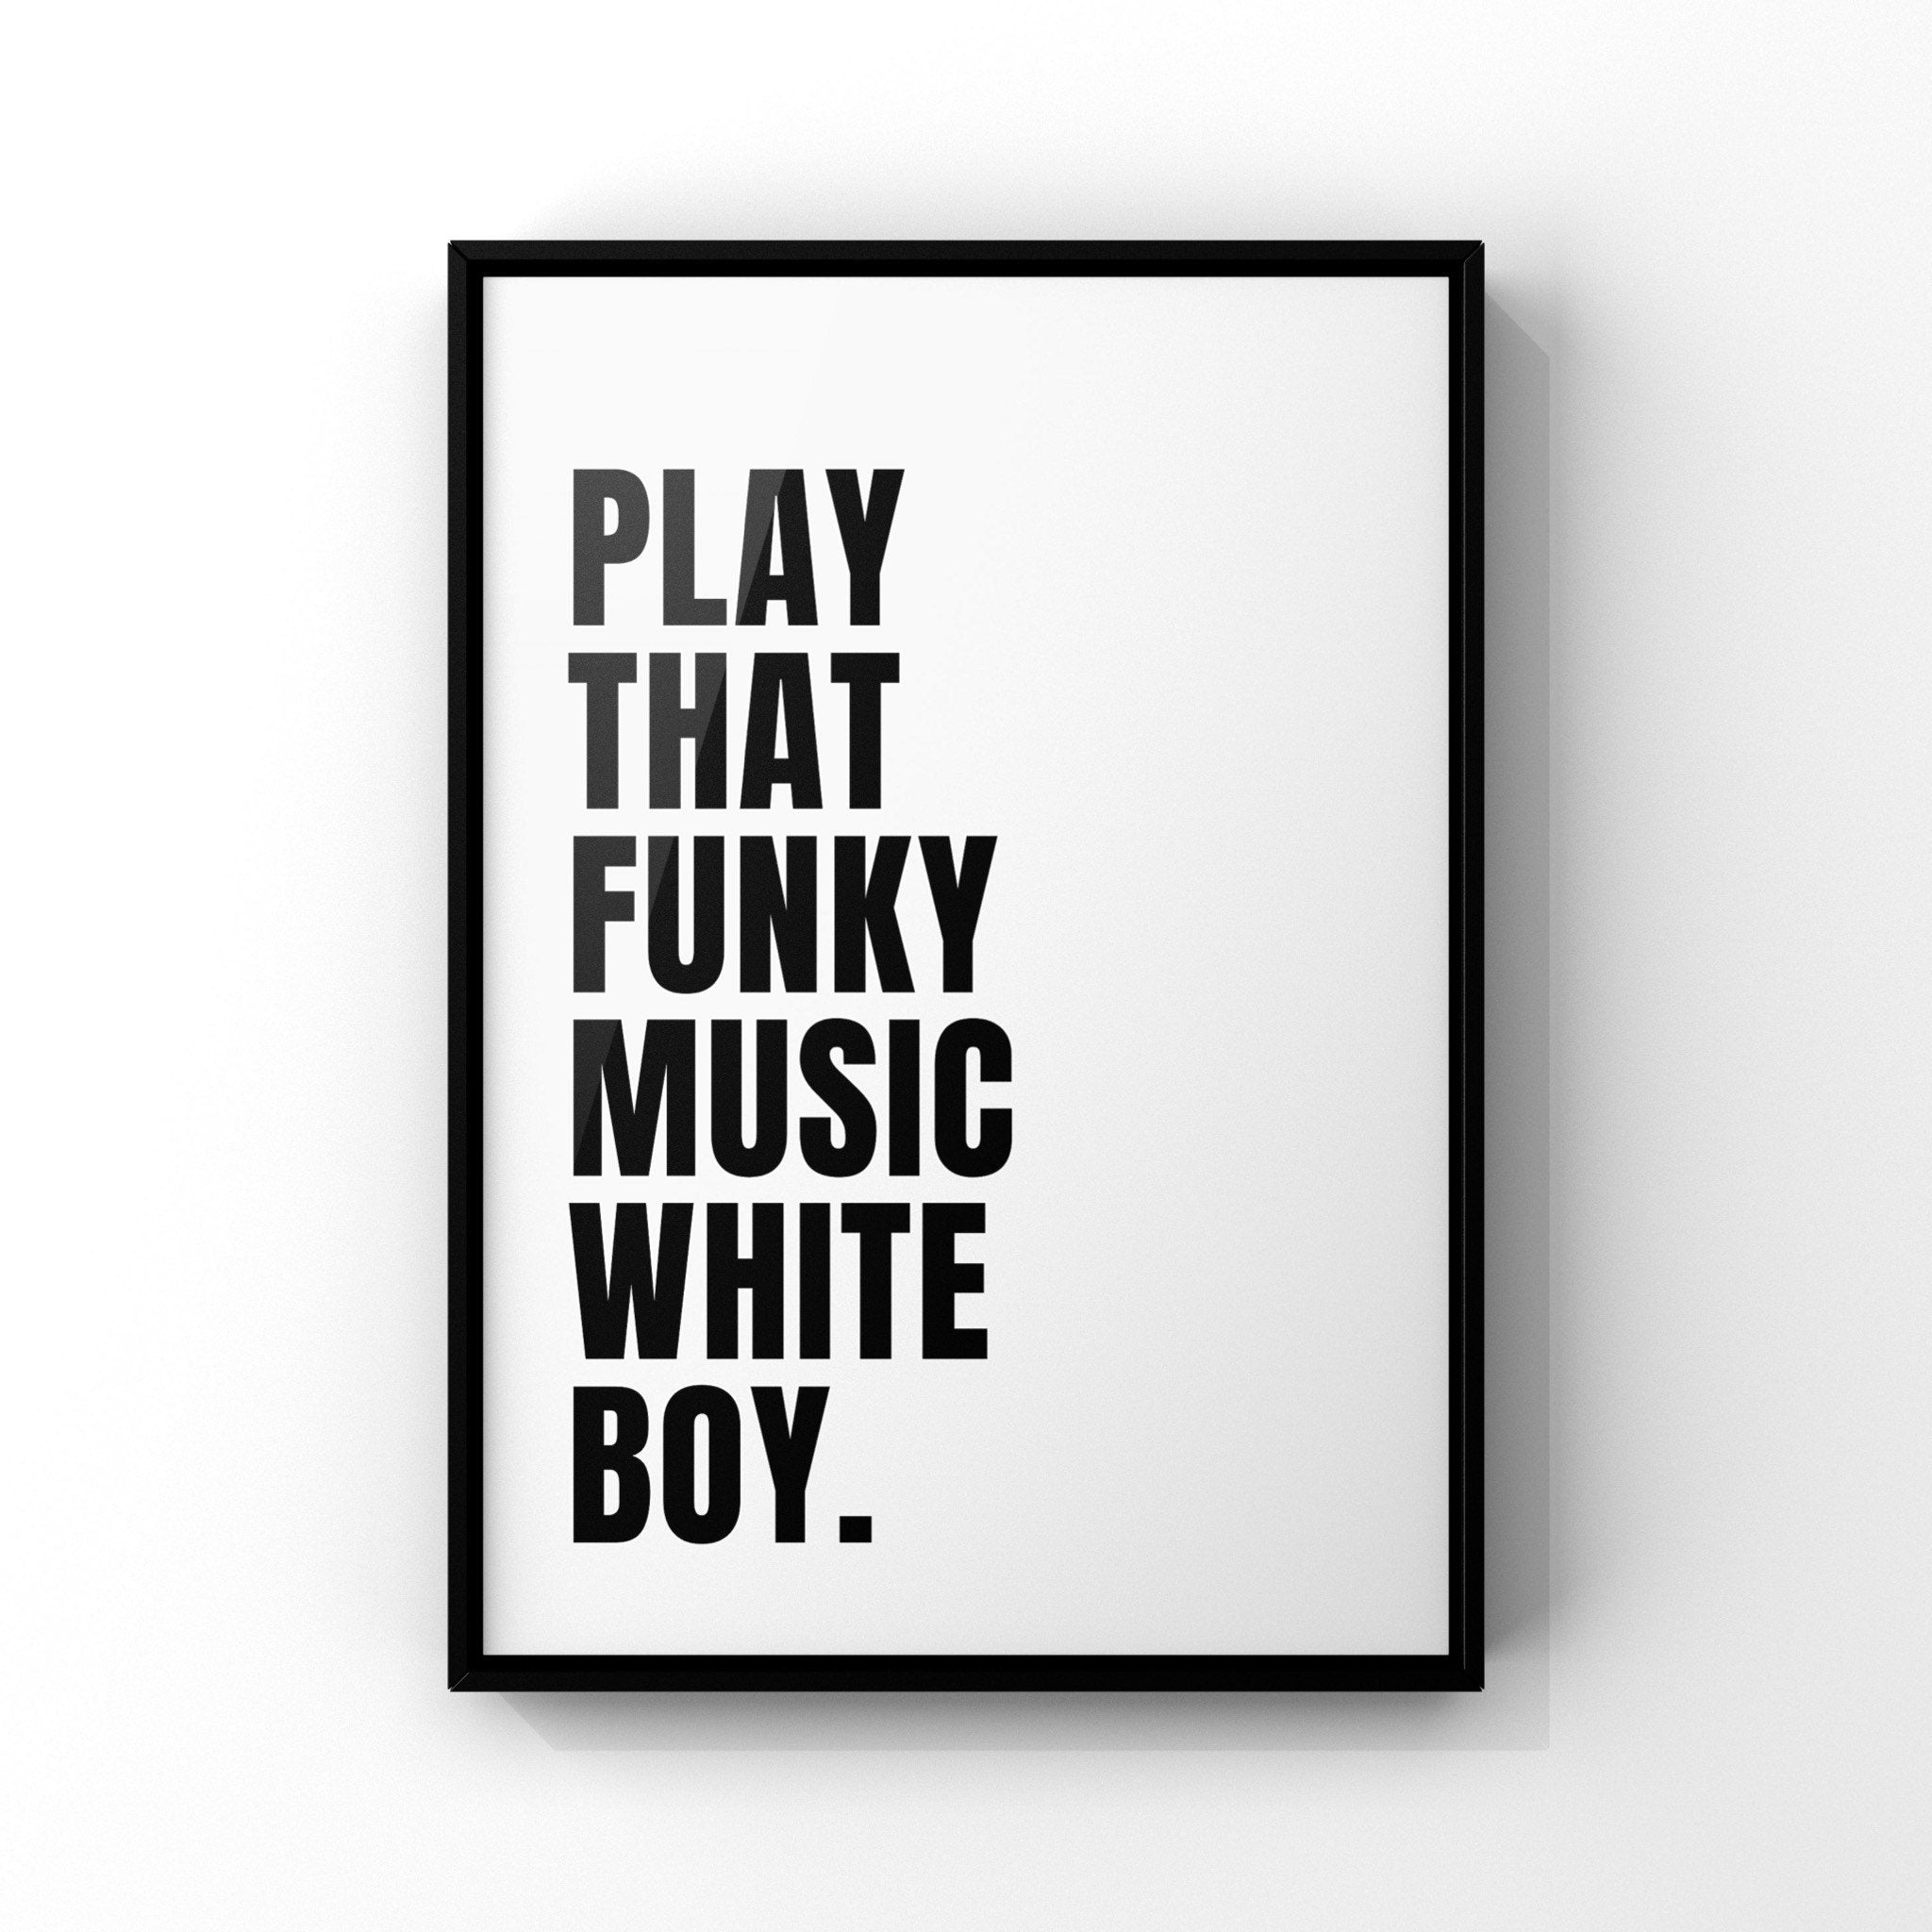 Play that funky music